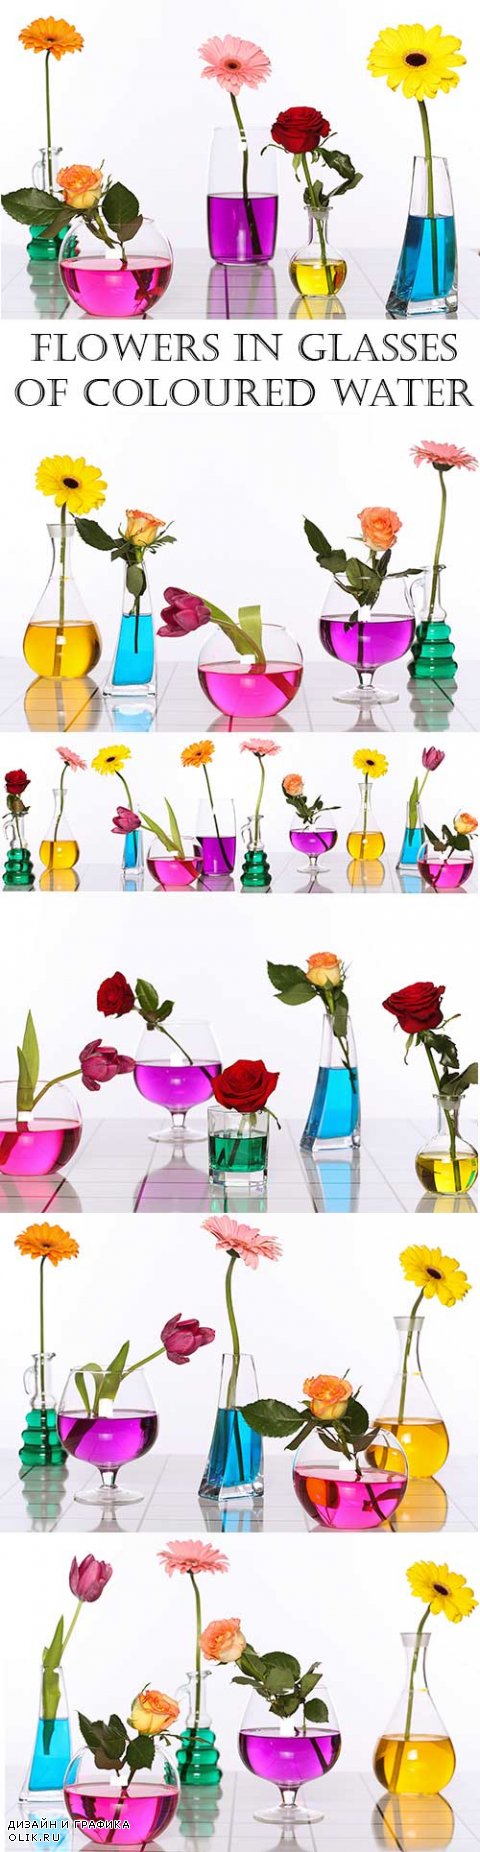 Flowers in glasses of coloured water